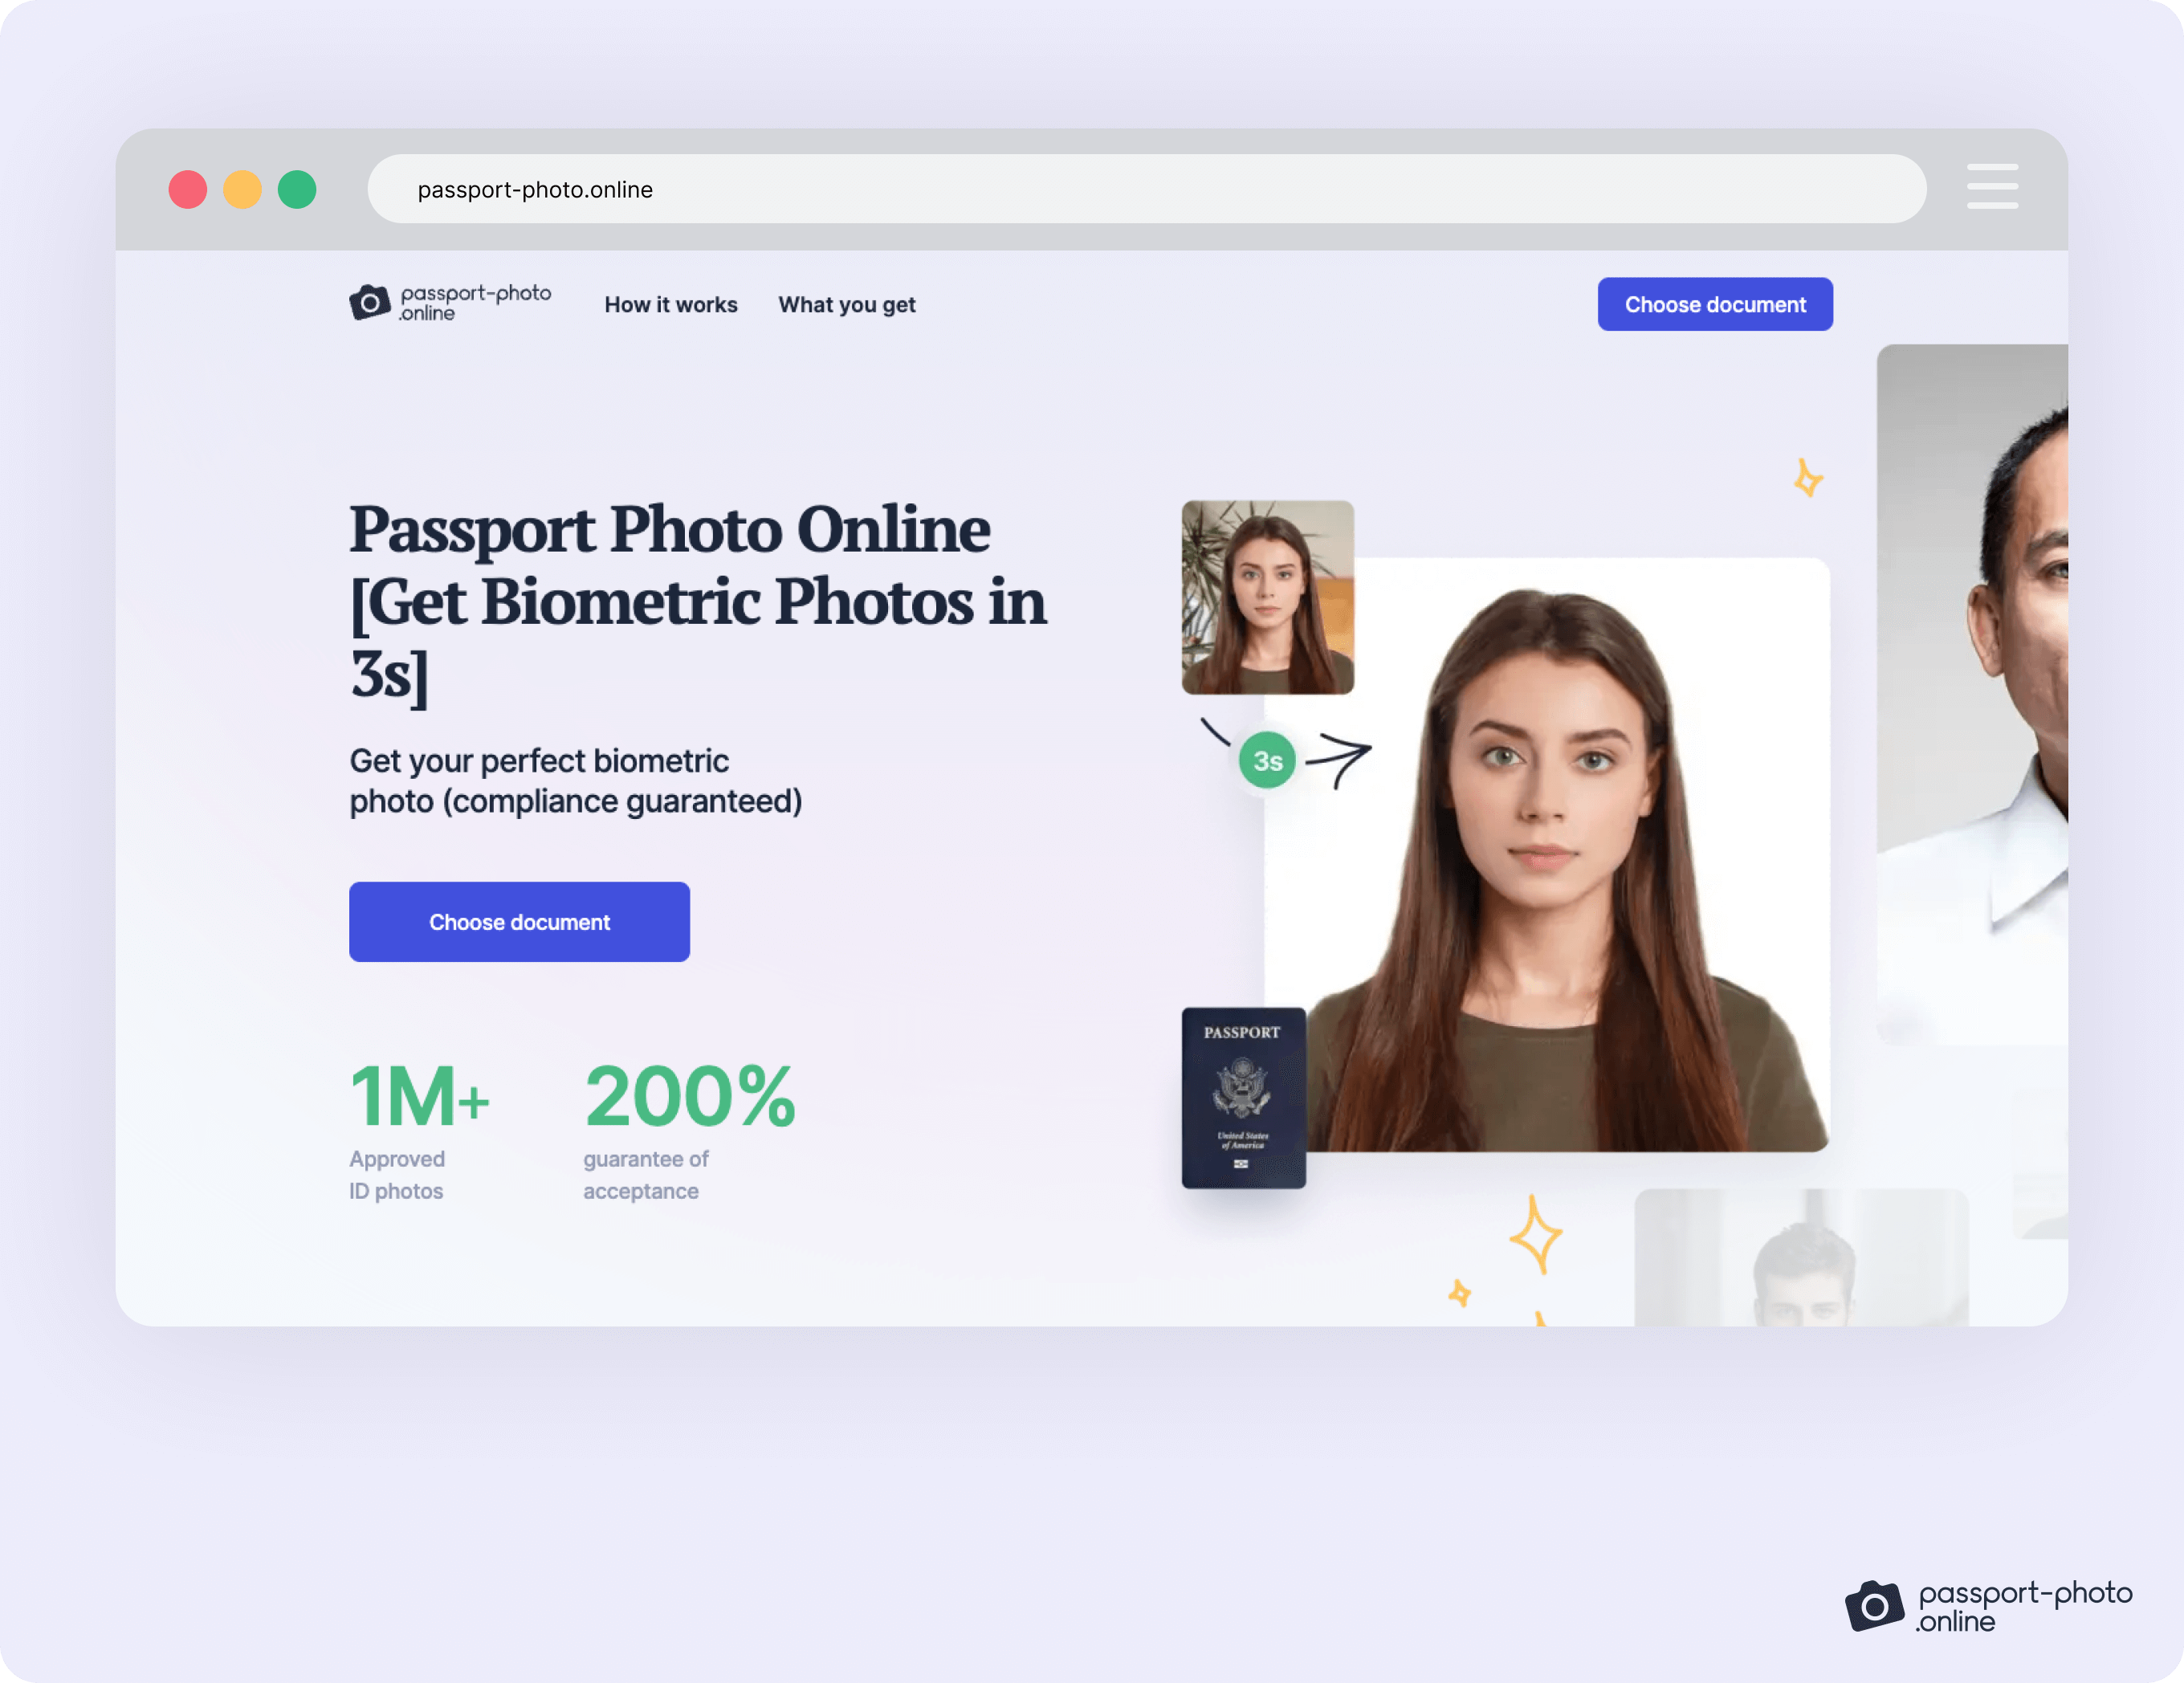 Passport Photo Online is your one-stop passport picture provider—all from the comfort of home.